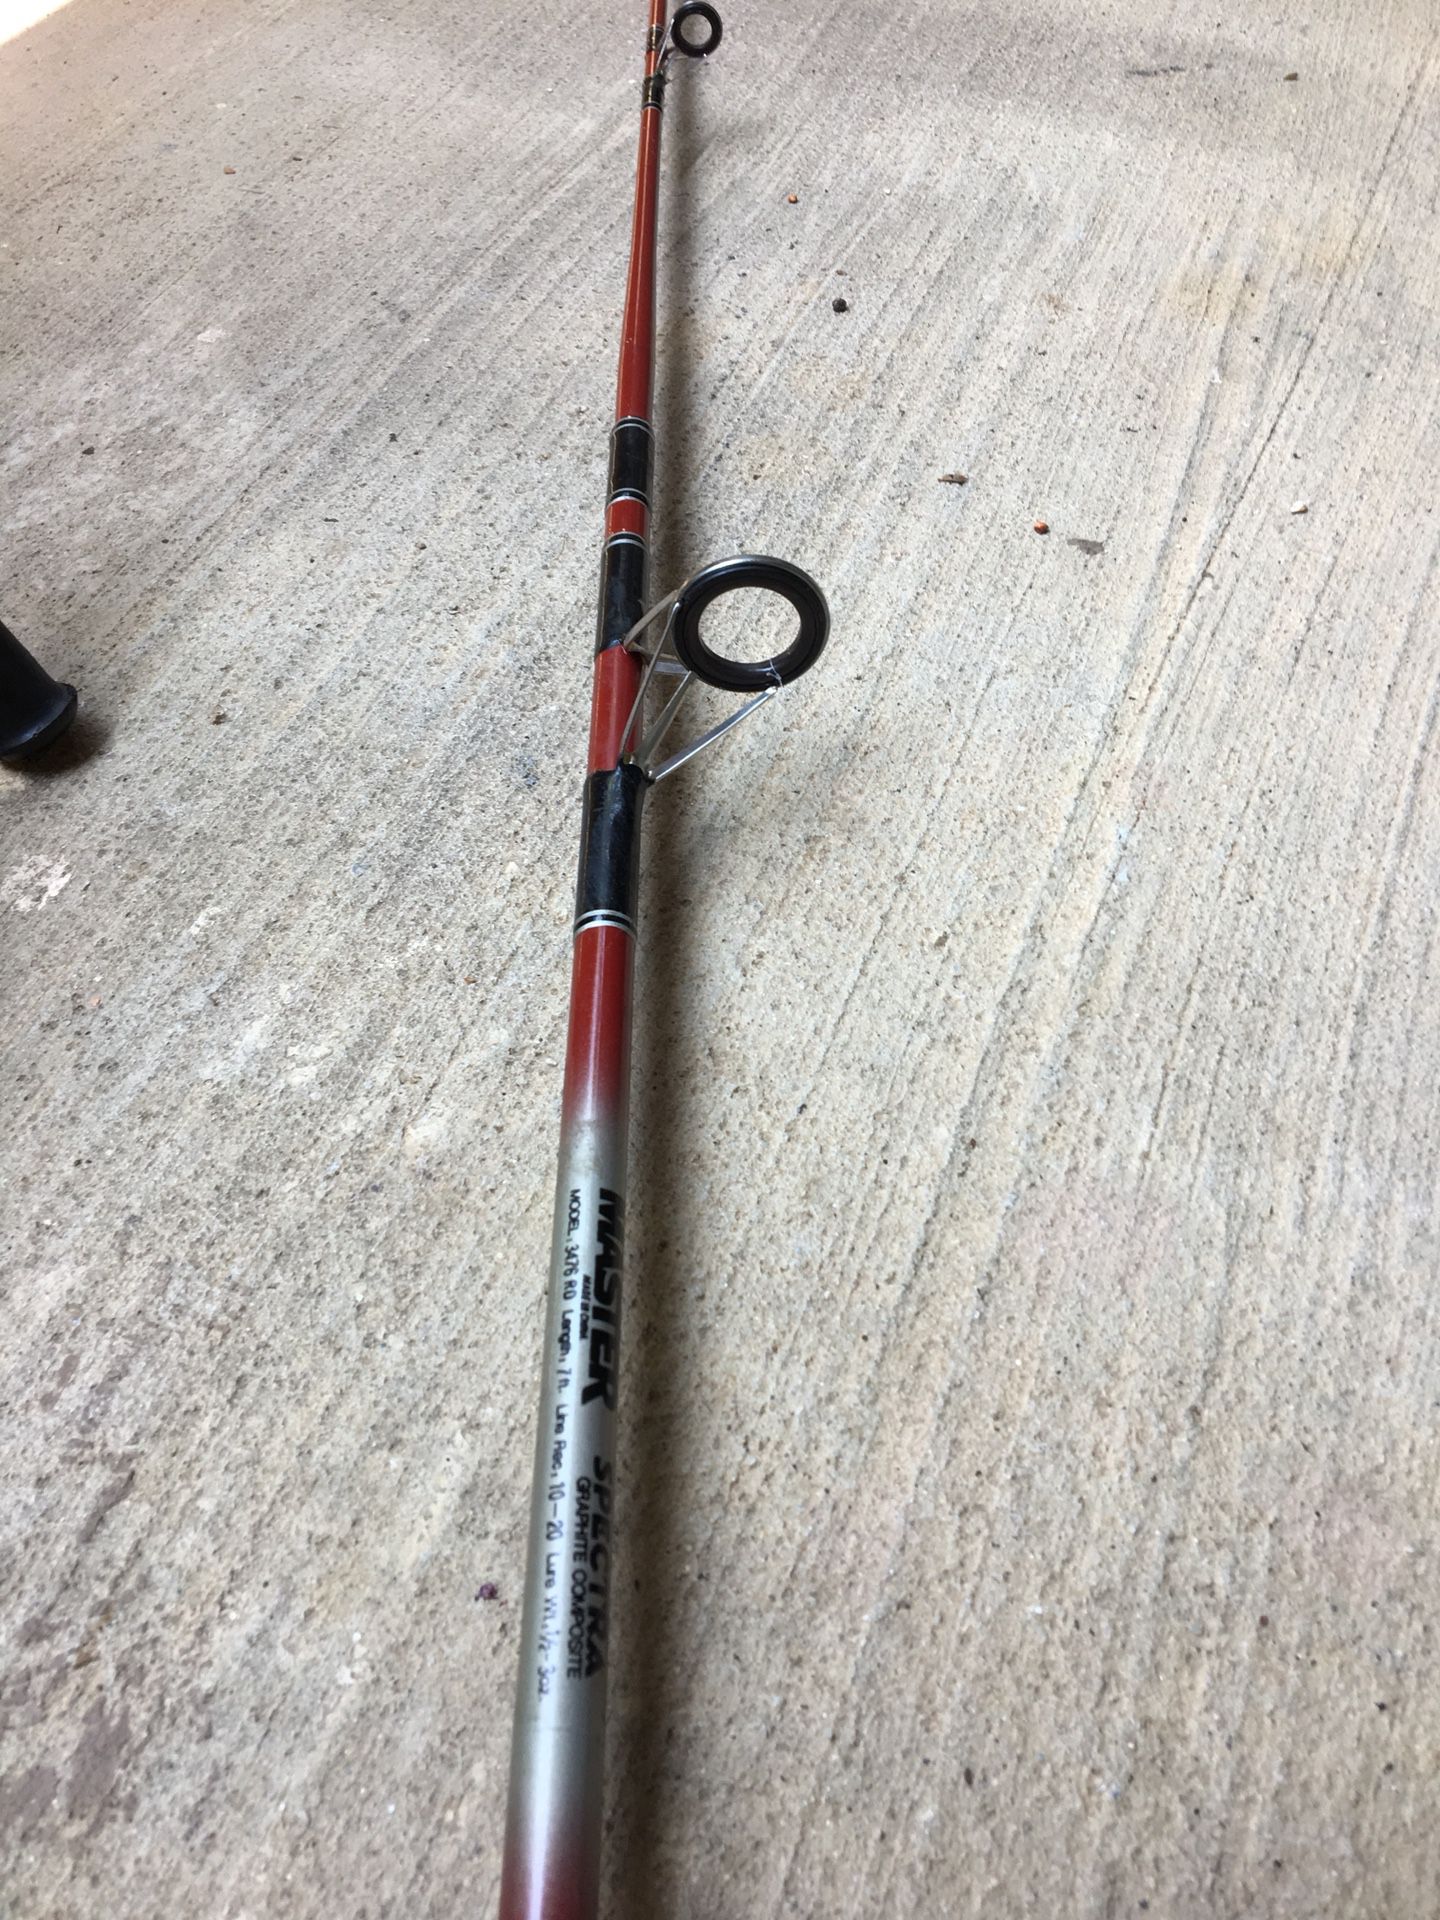 7 foot master spectra graphite composite rod with master 250 fishing reel  for Sale in Euless, TX - OfferUp